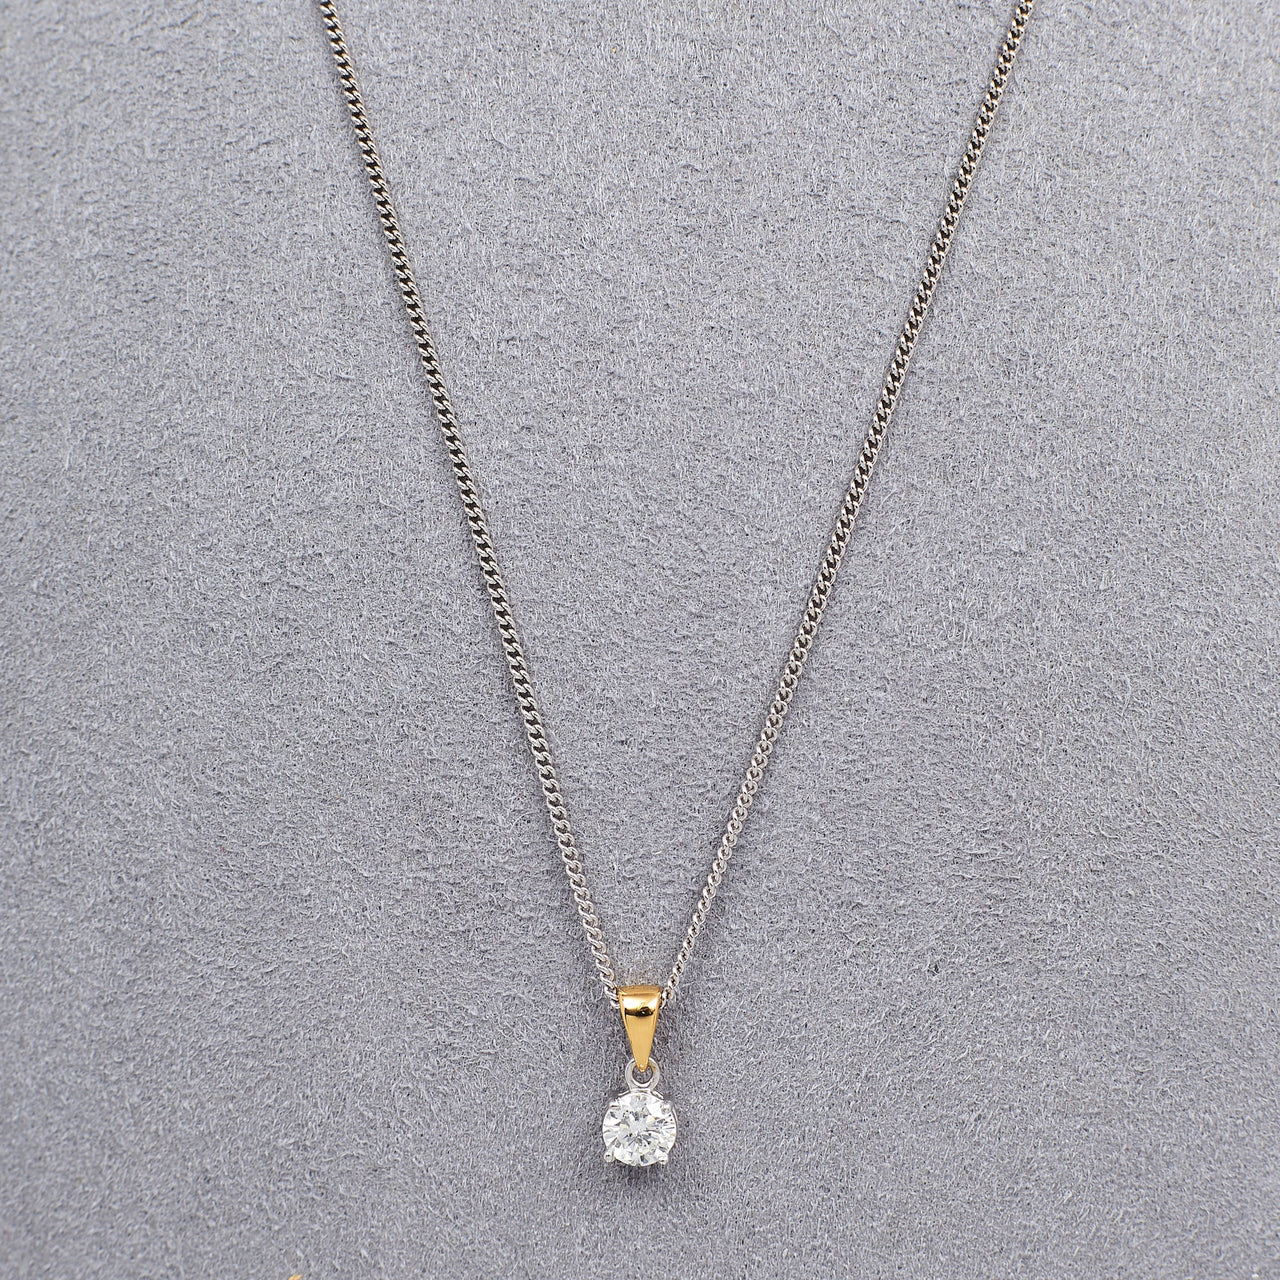 Pre-Owned 18ct Gold Diamond Solitaire Pendant Necklace